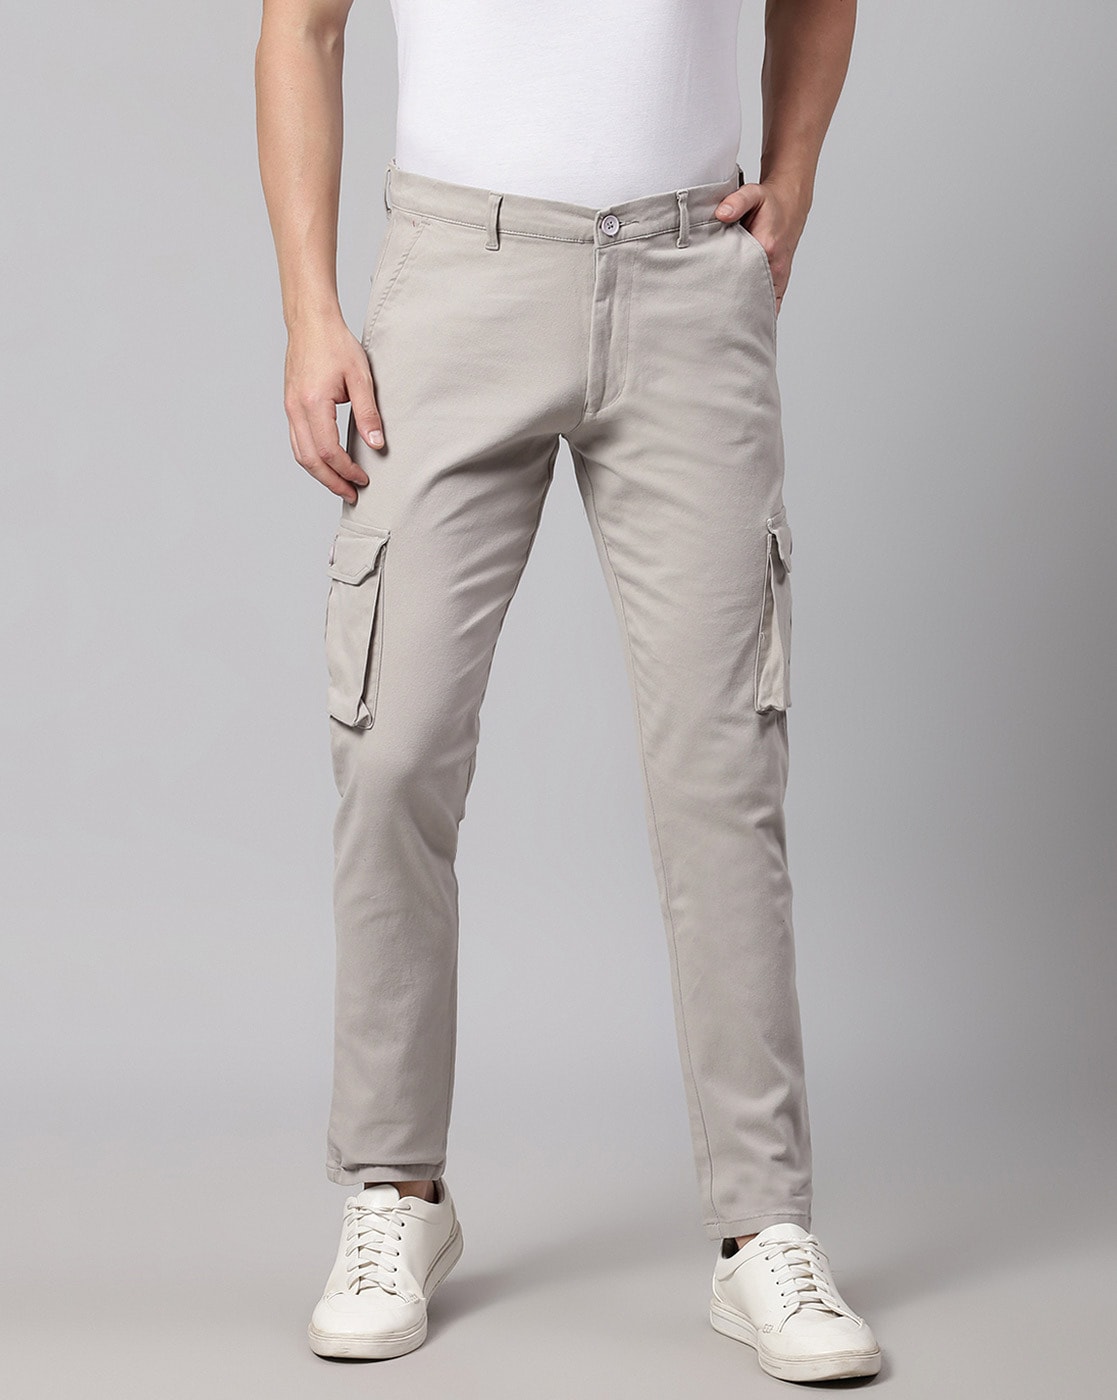 Relaxed Fit Cargo Pants - Gray - Men | H&M US